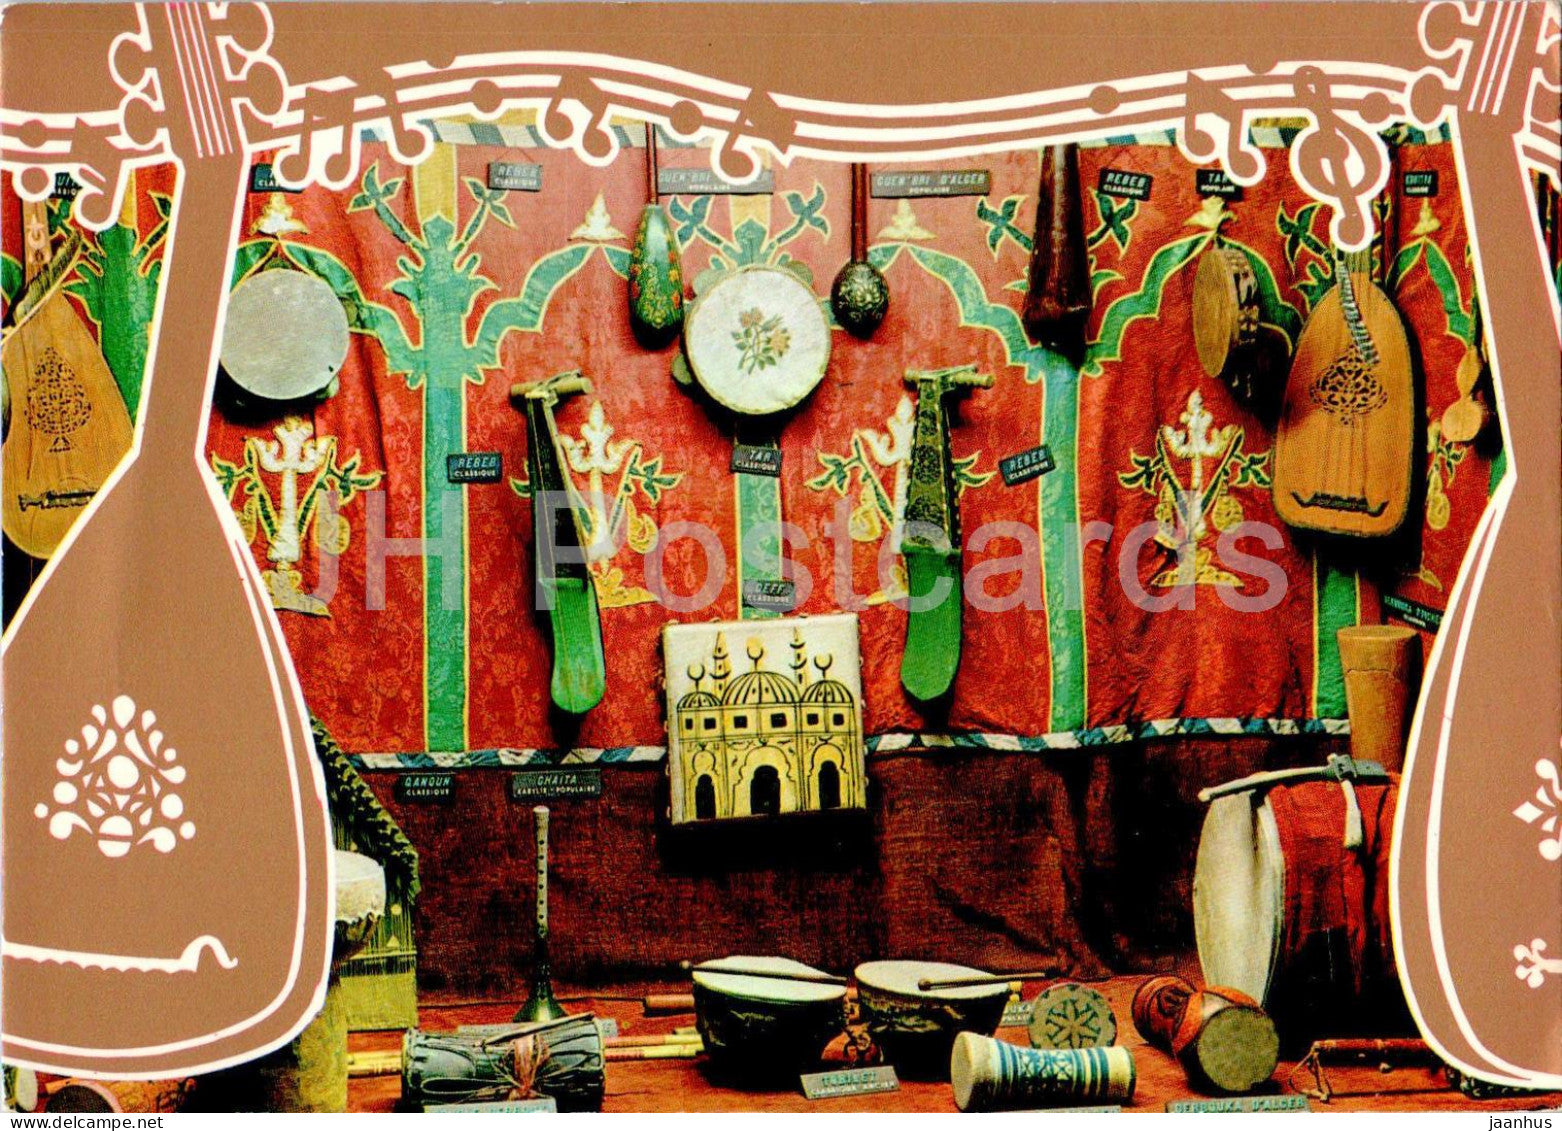 Algiers the White - Bardo Museum - Traditional Music Instruments - Algeria - used - JH Postcards